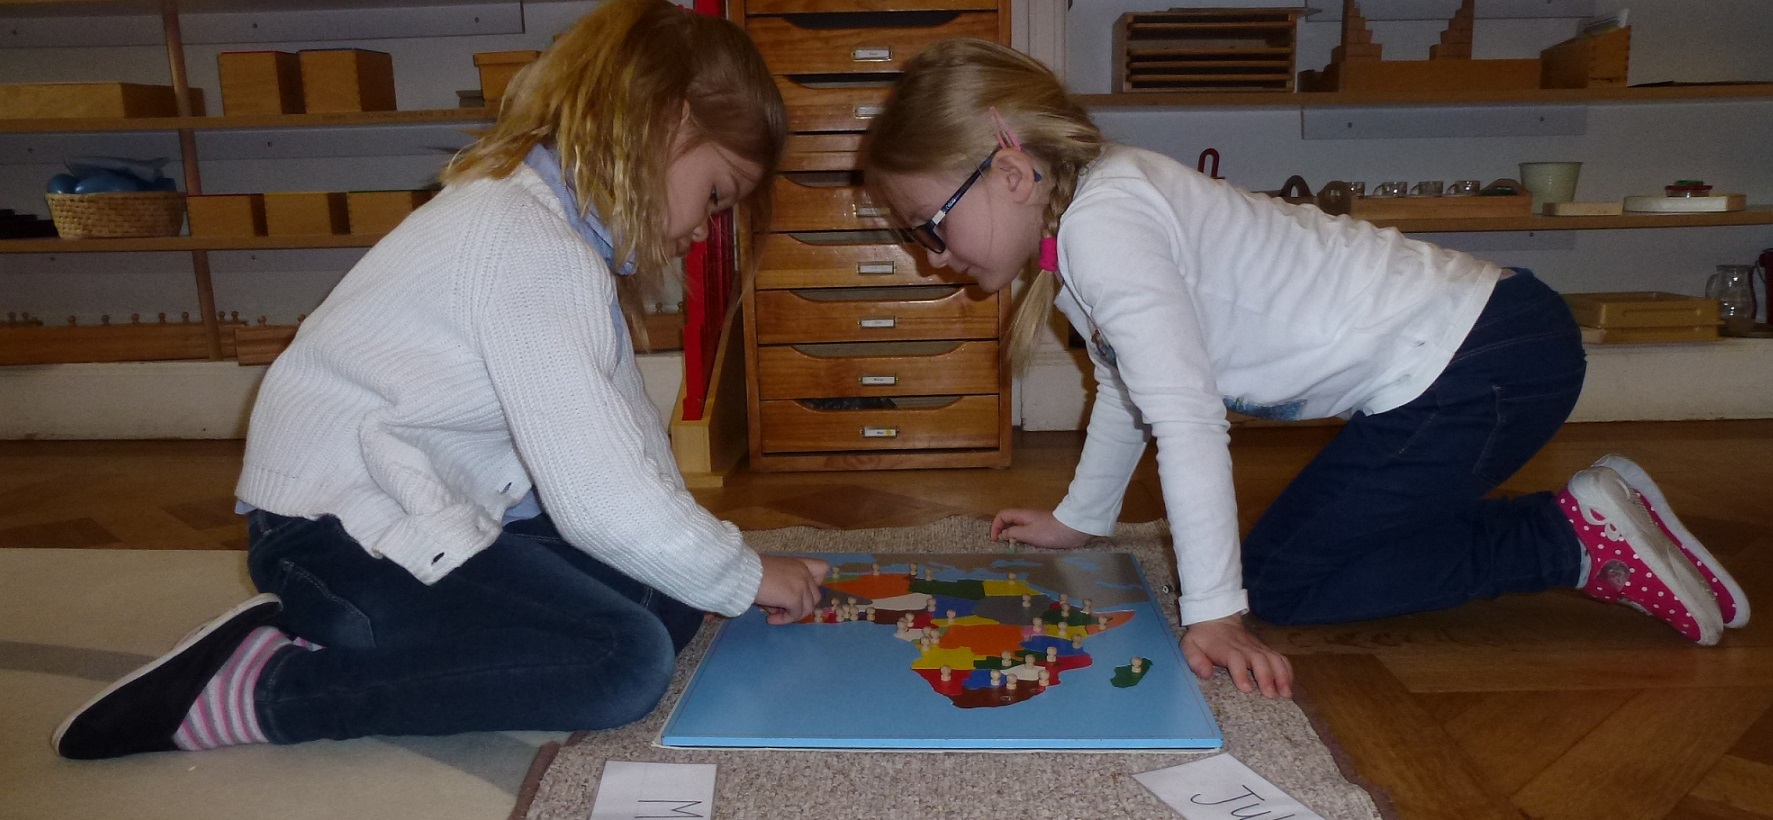 Two children working on the floor to match the country shapes in a map of Africa using Montessori materials.